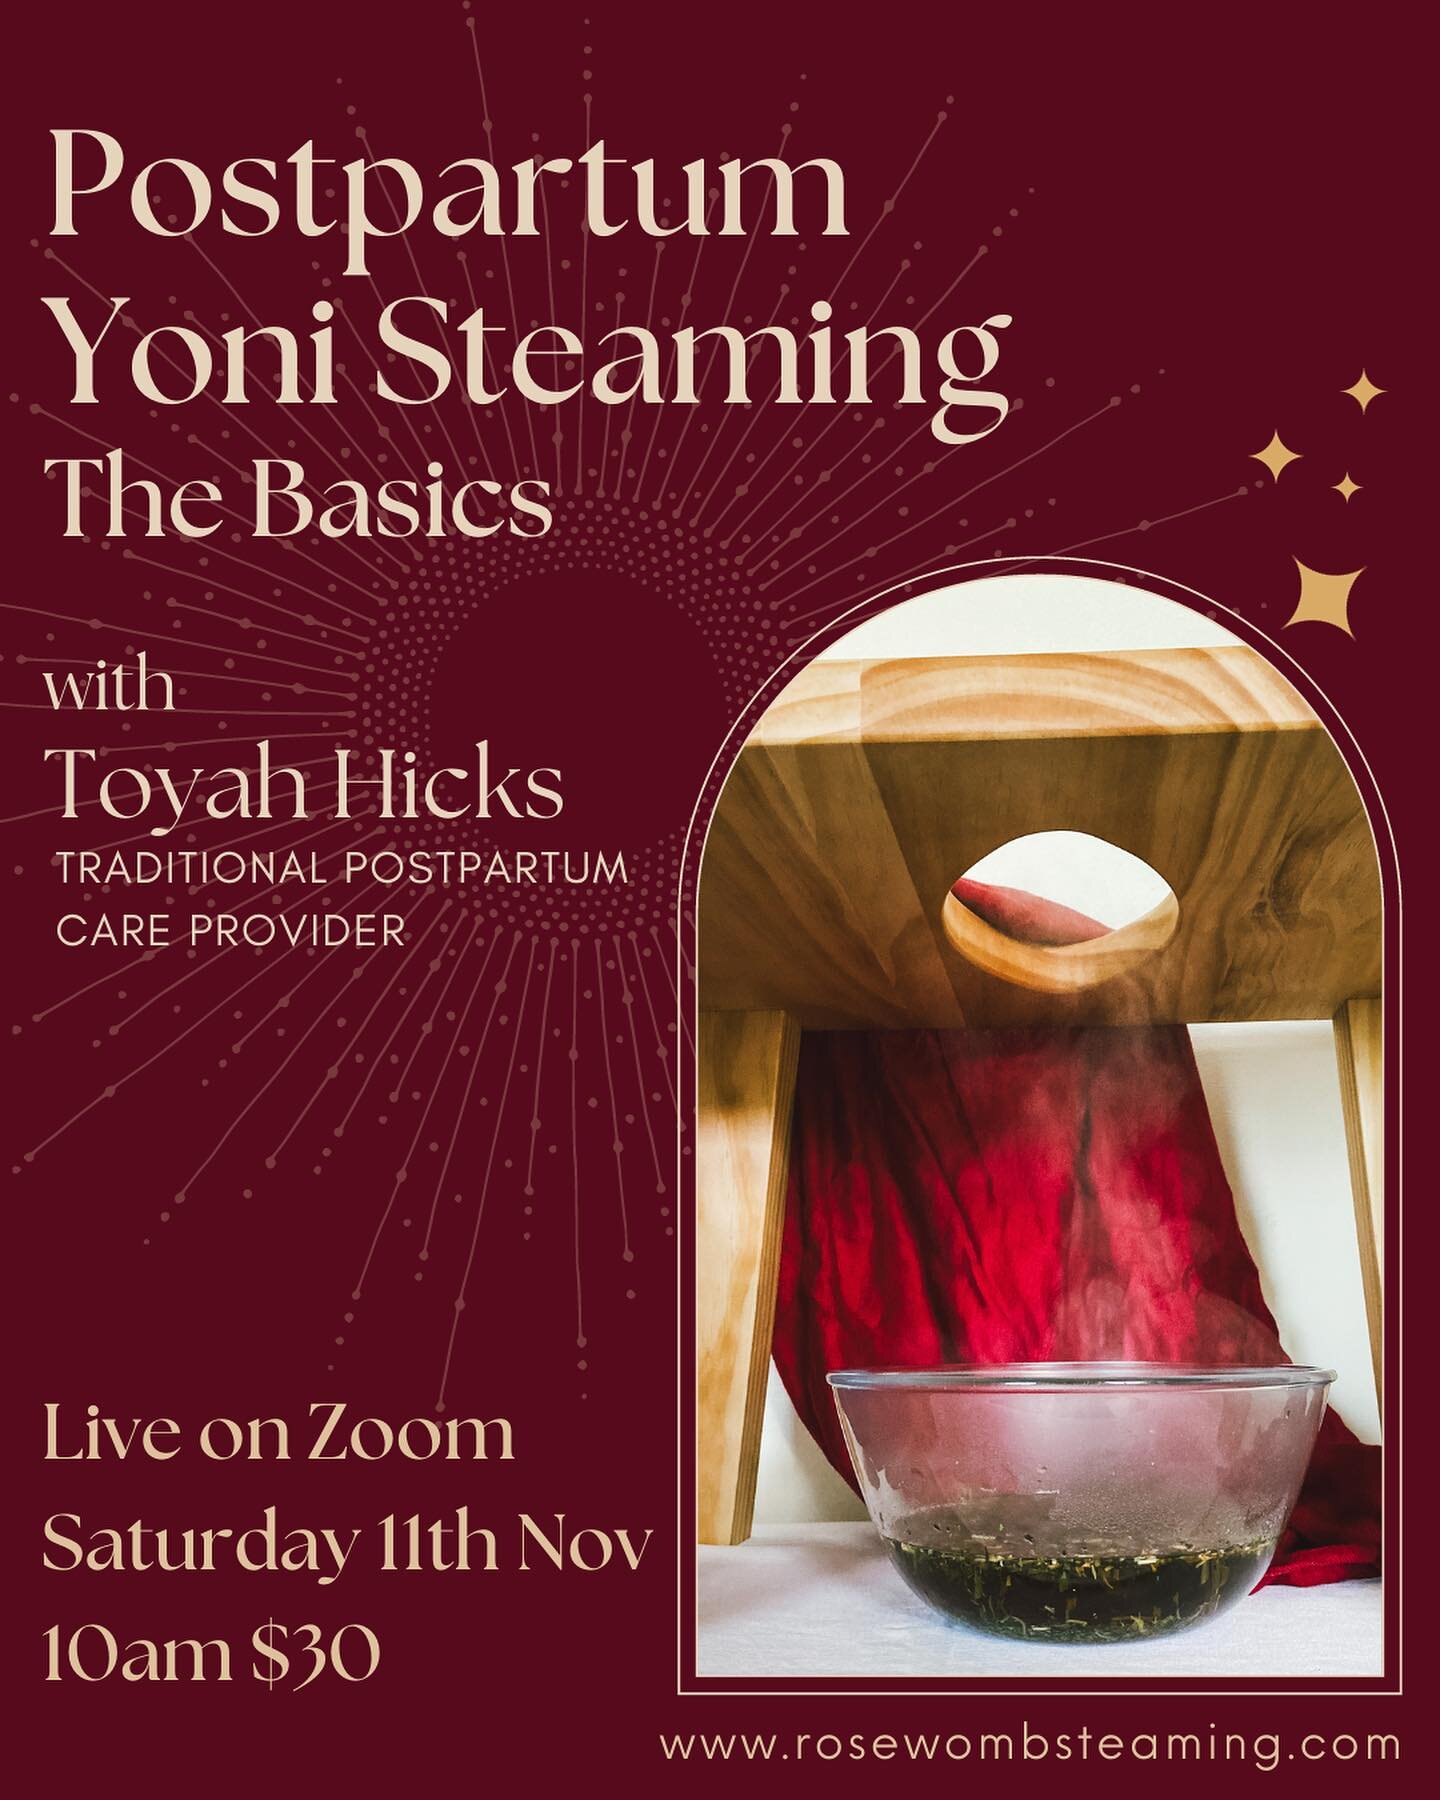 New date for this workshop my loves!

Replay available for anyone who cannot make it live x